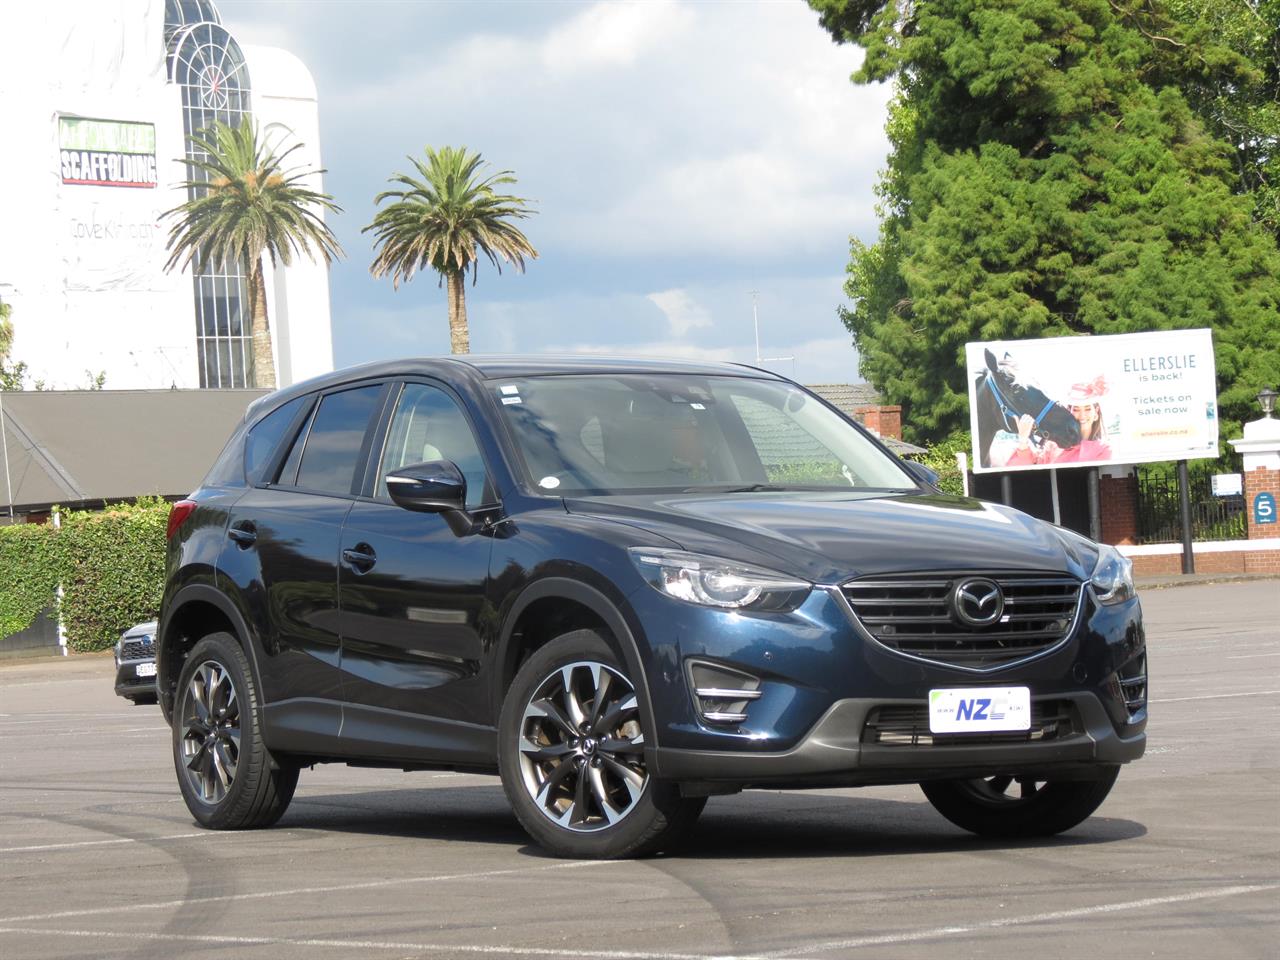 NZC 2015 Mazda CX-5 just arrived to Auckland